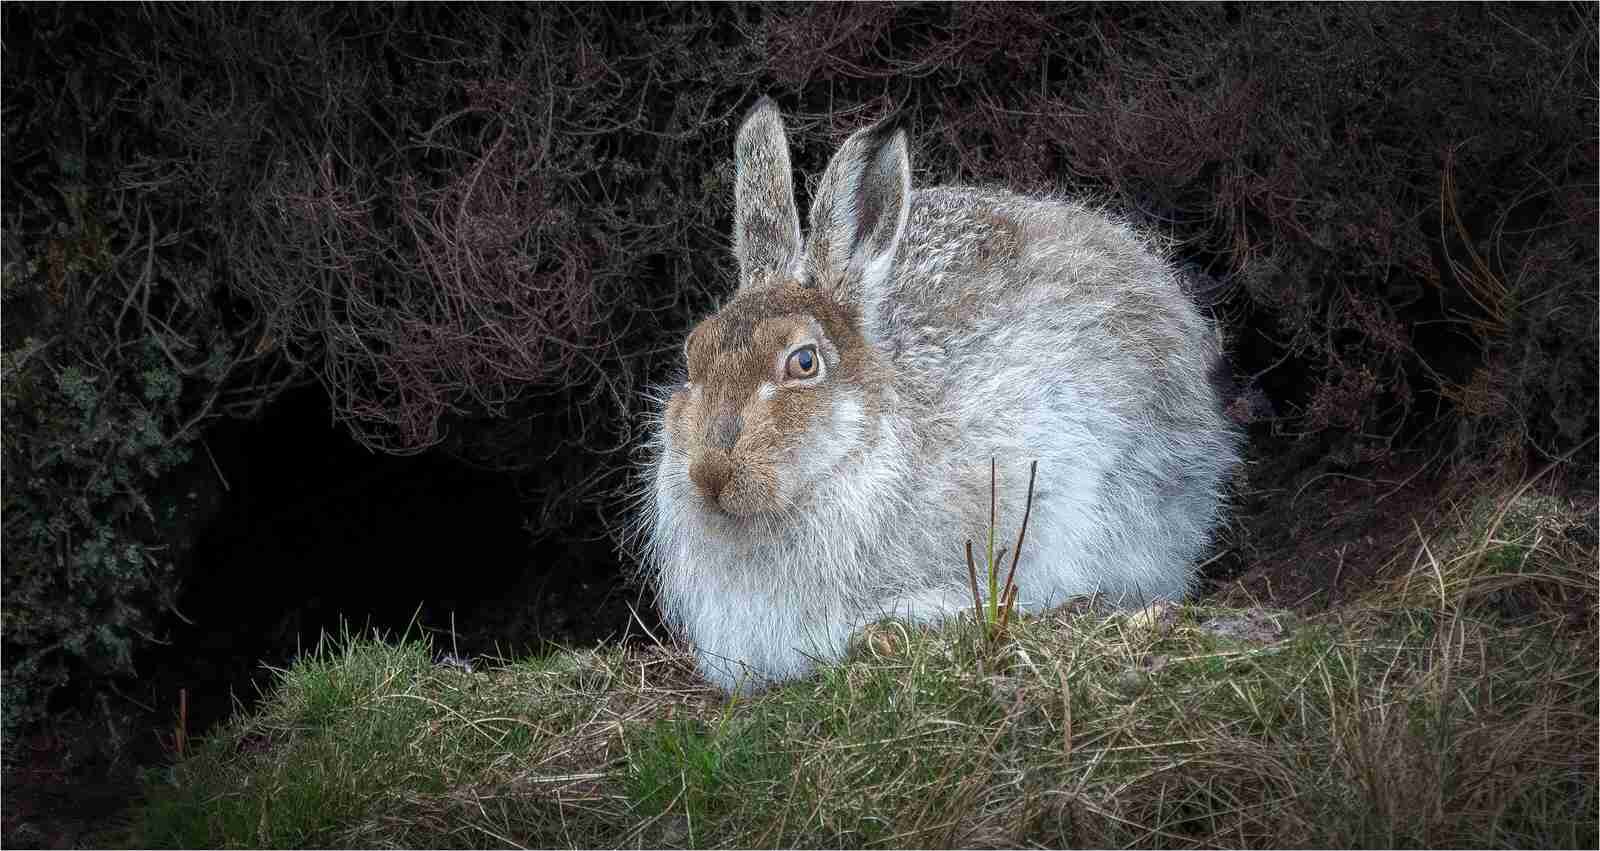 'Mountain Hare - Sheltering'